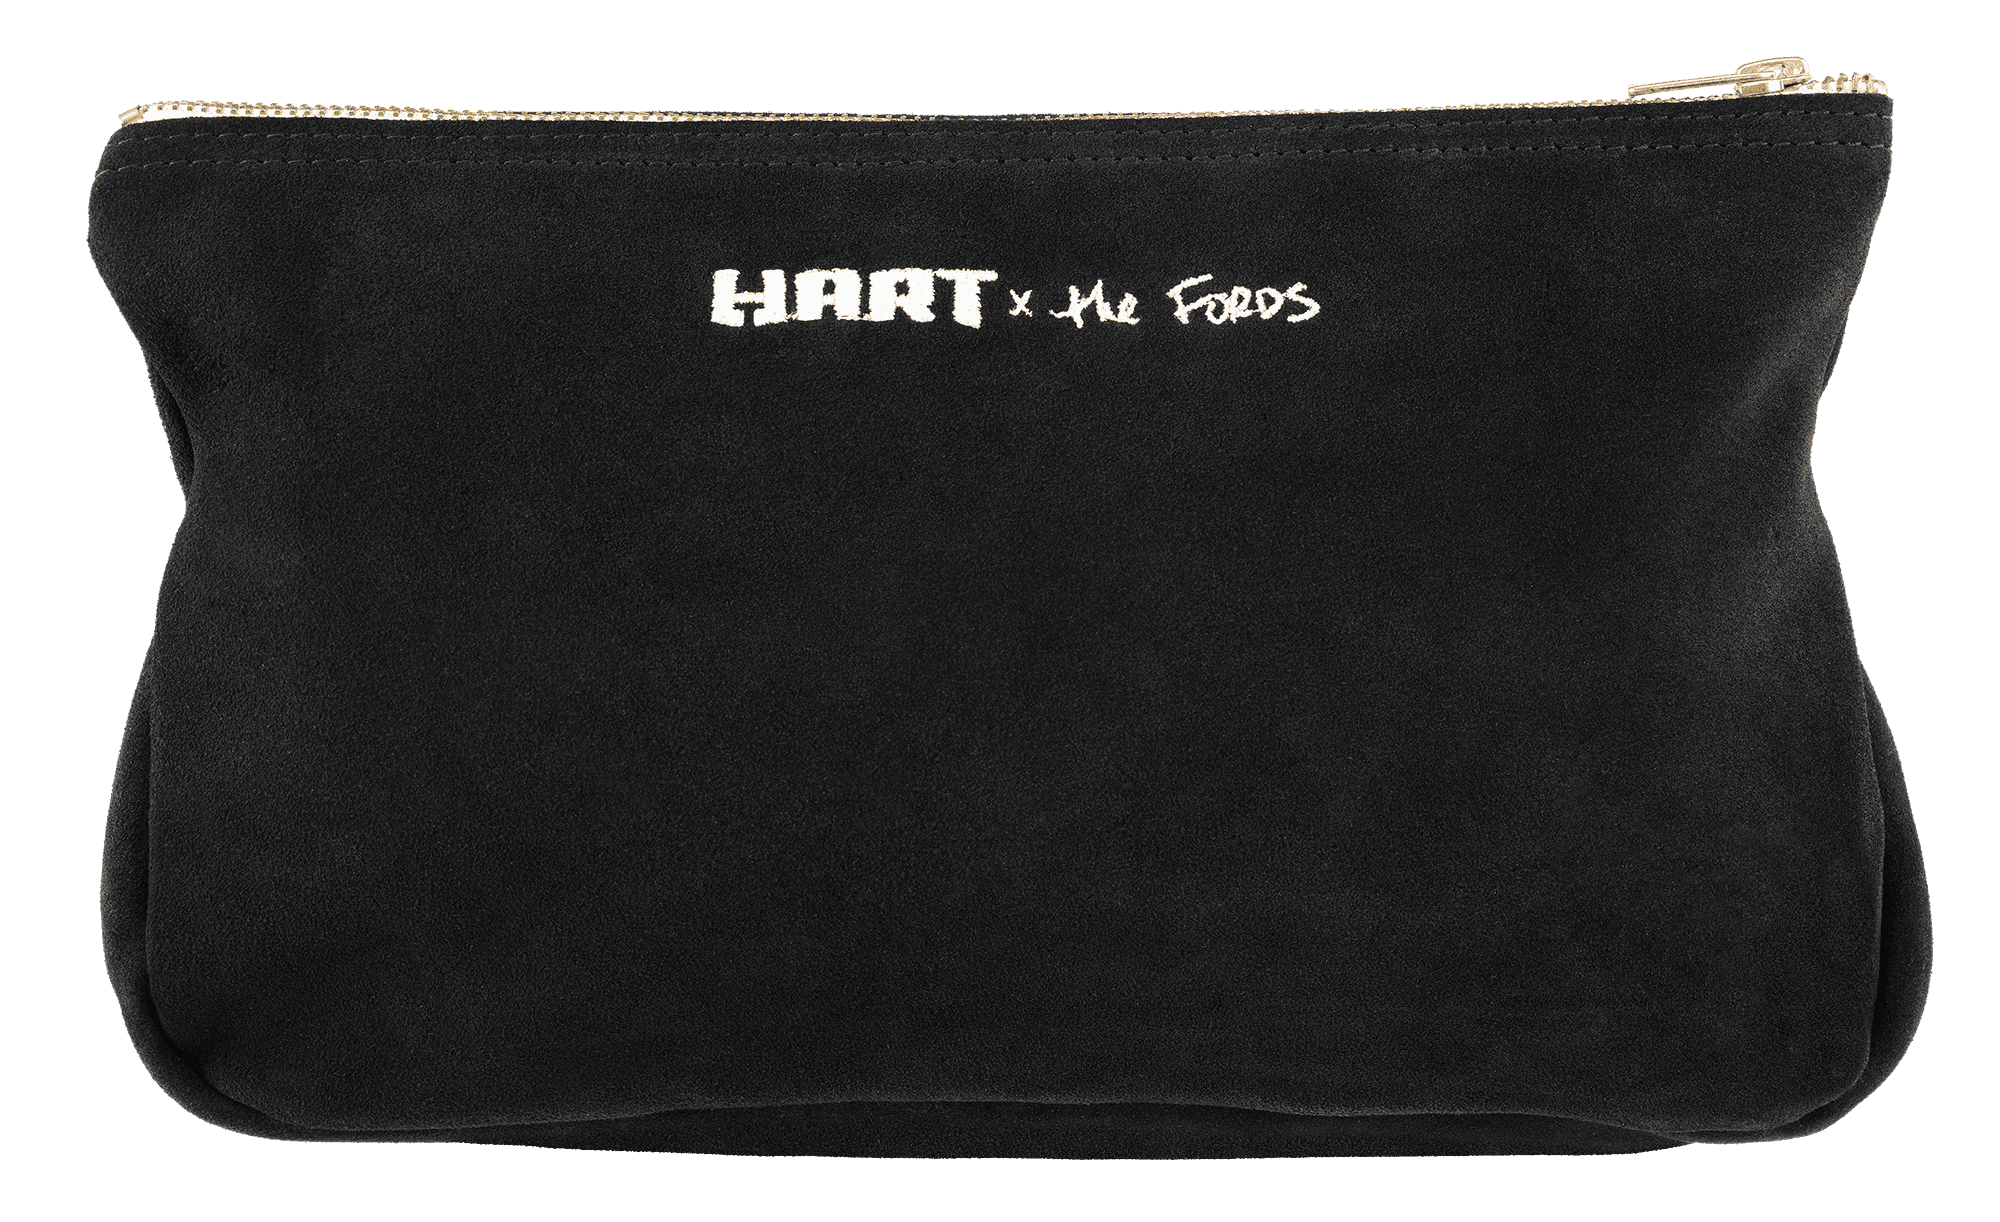 HART x the Fords Leather Tool Pouch $6.45 + Free S&H w/ Walmart+ or $35+